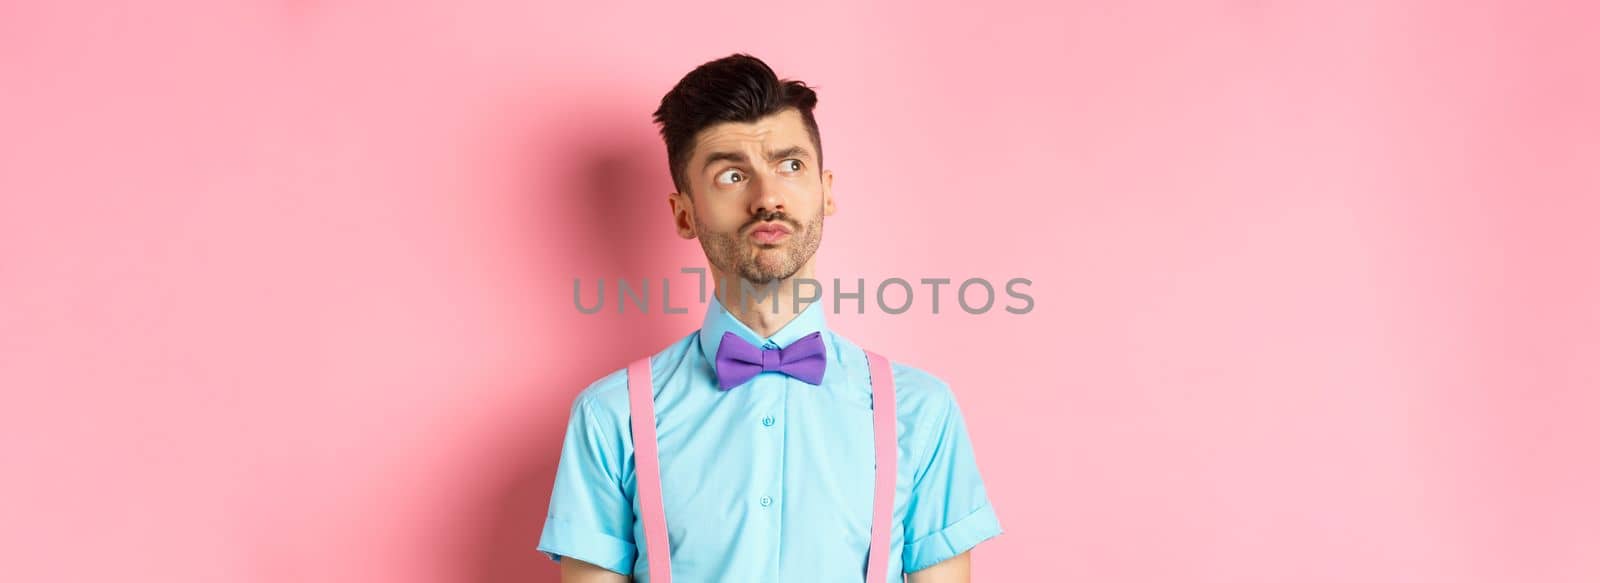 Pensive young man in romantic outfit, looking away and thinking, standing thoughtful on pink background in fancy bow-tie and shirt.